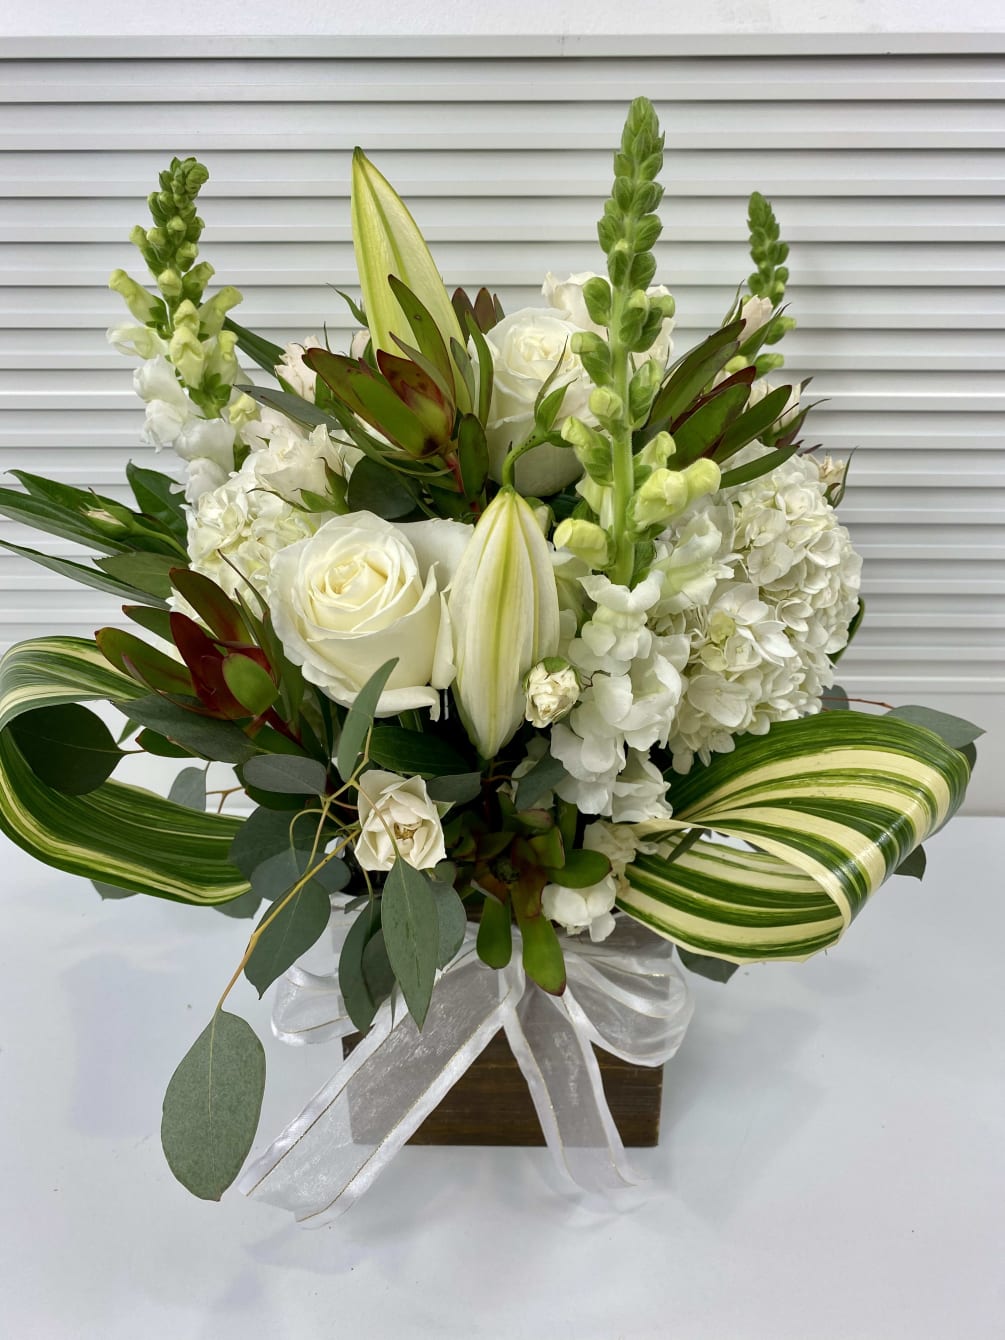 Green and white arrangement in a wooden vase. Hydrangeas, snapdragon, roses and